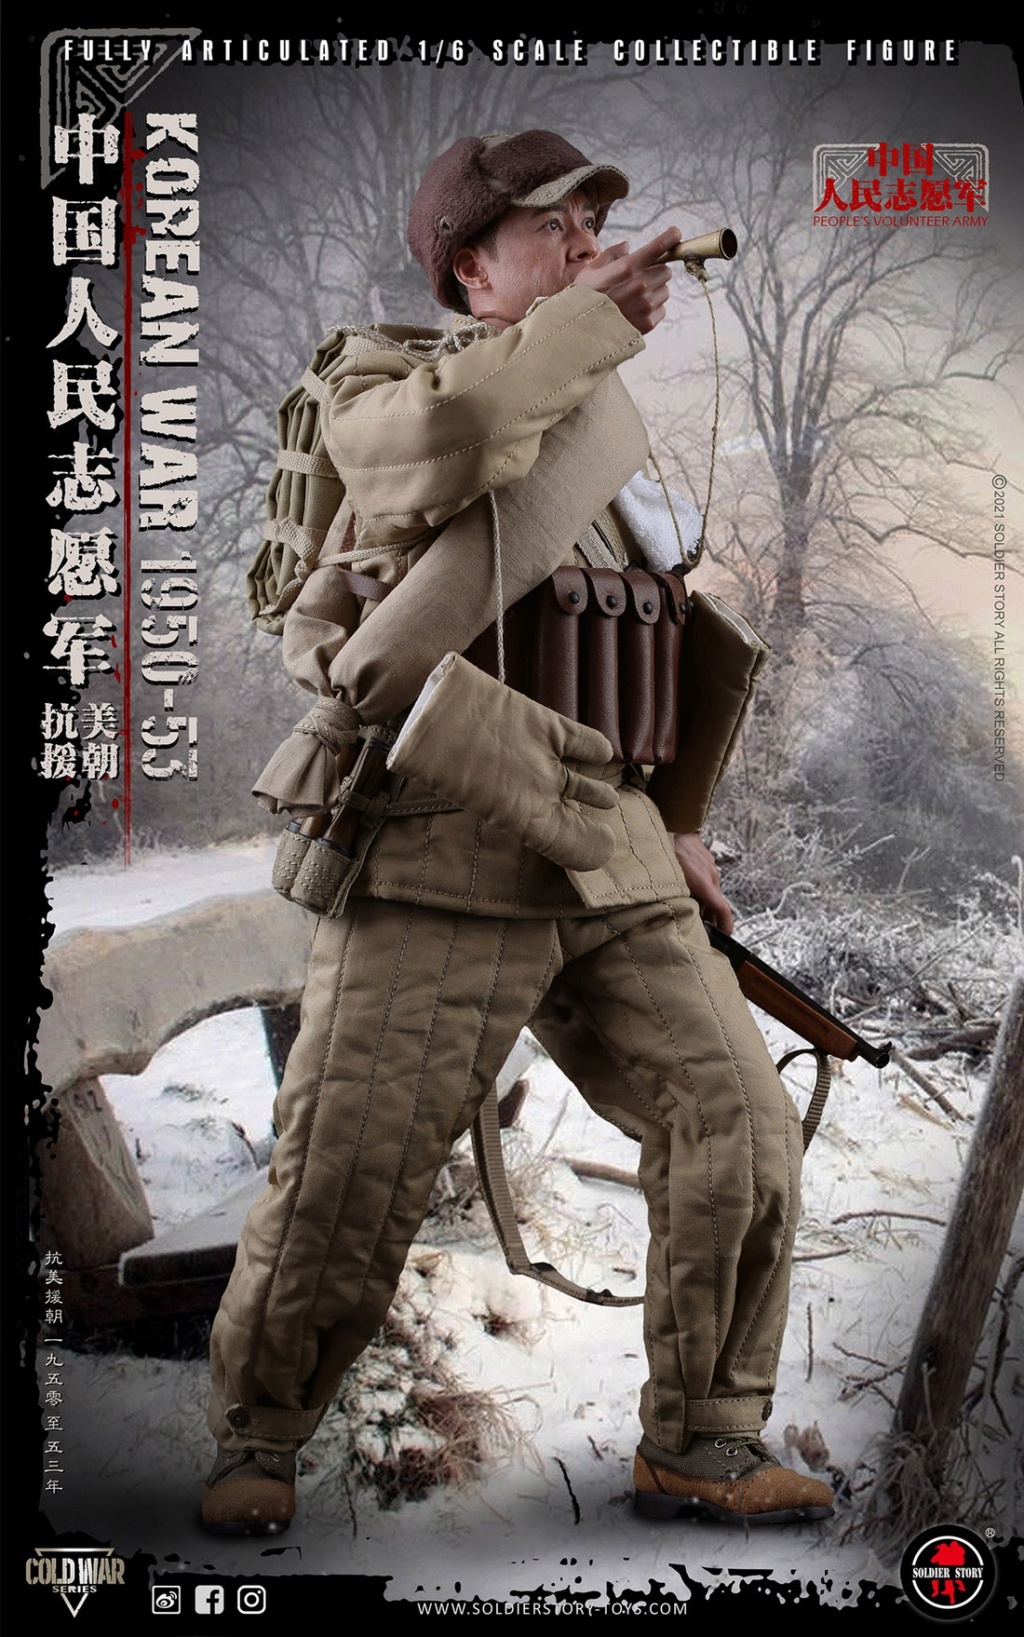 chinese - NEW PRODUCT: SOLDIER STORY: 1/6 Chinese People’s Volunteers 1950-53 Collectible Action Figure (#SS-124) 0daa1410